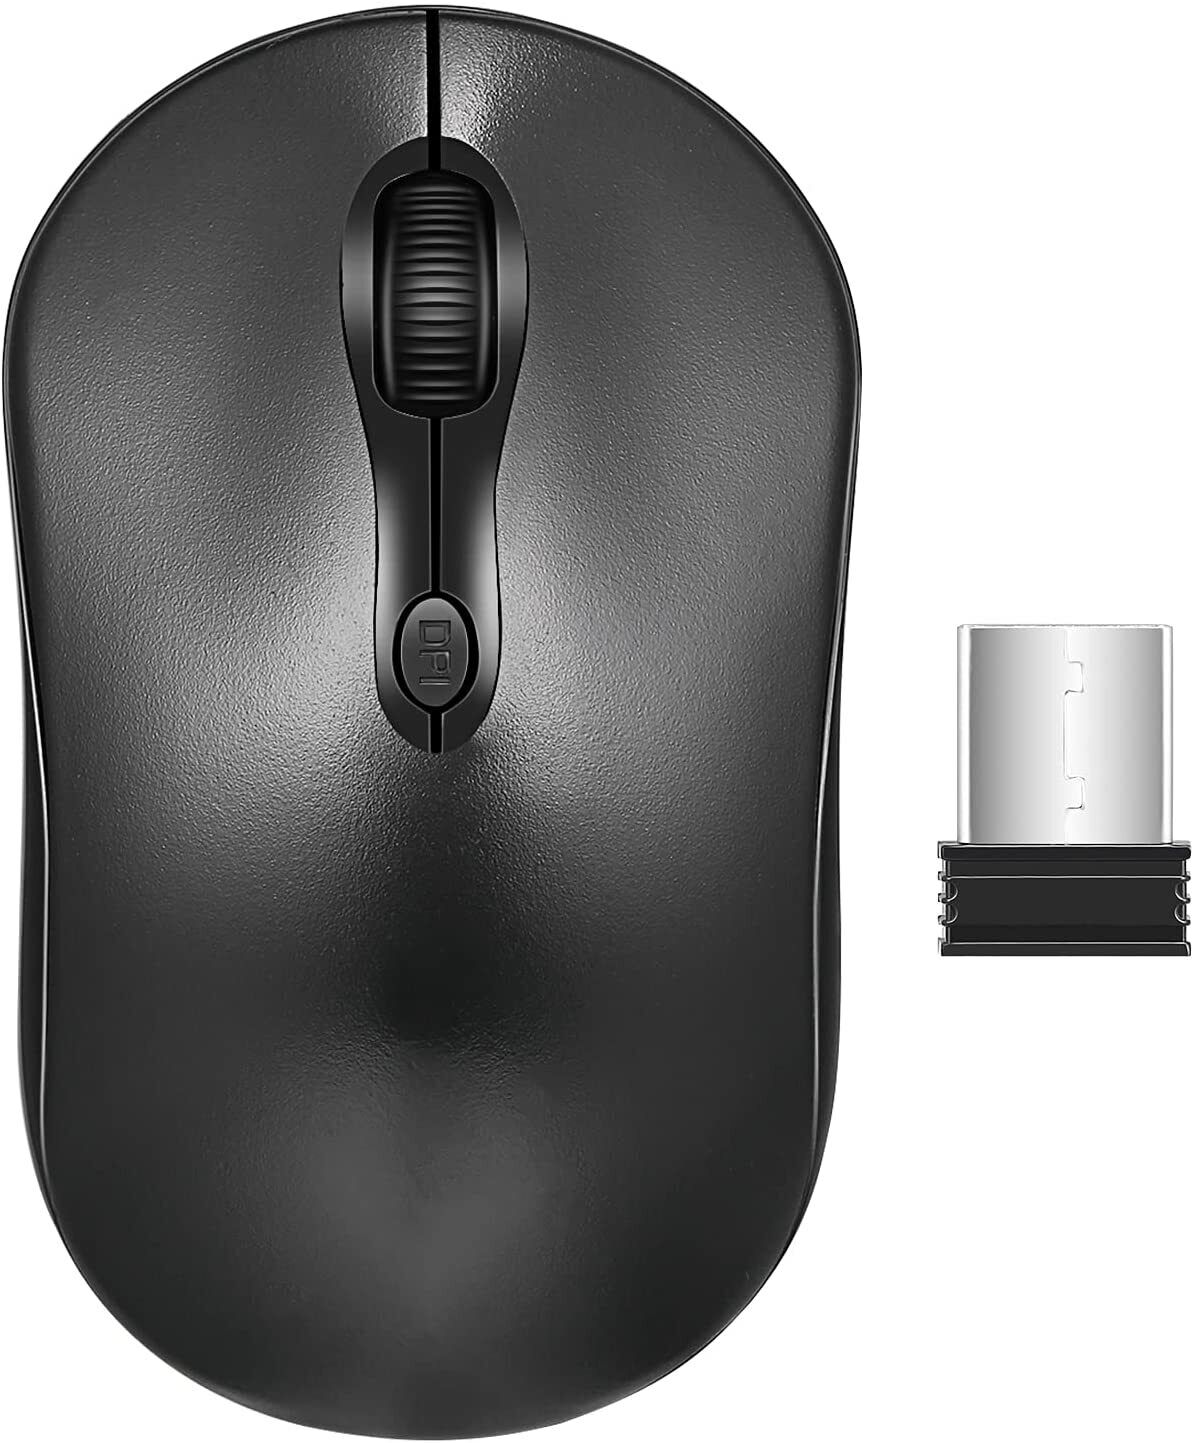 Wireless Mouse, 2.4G Wireless Mouse for Laptop Ergonomic Computer Mouse with USB